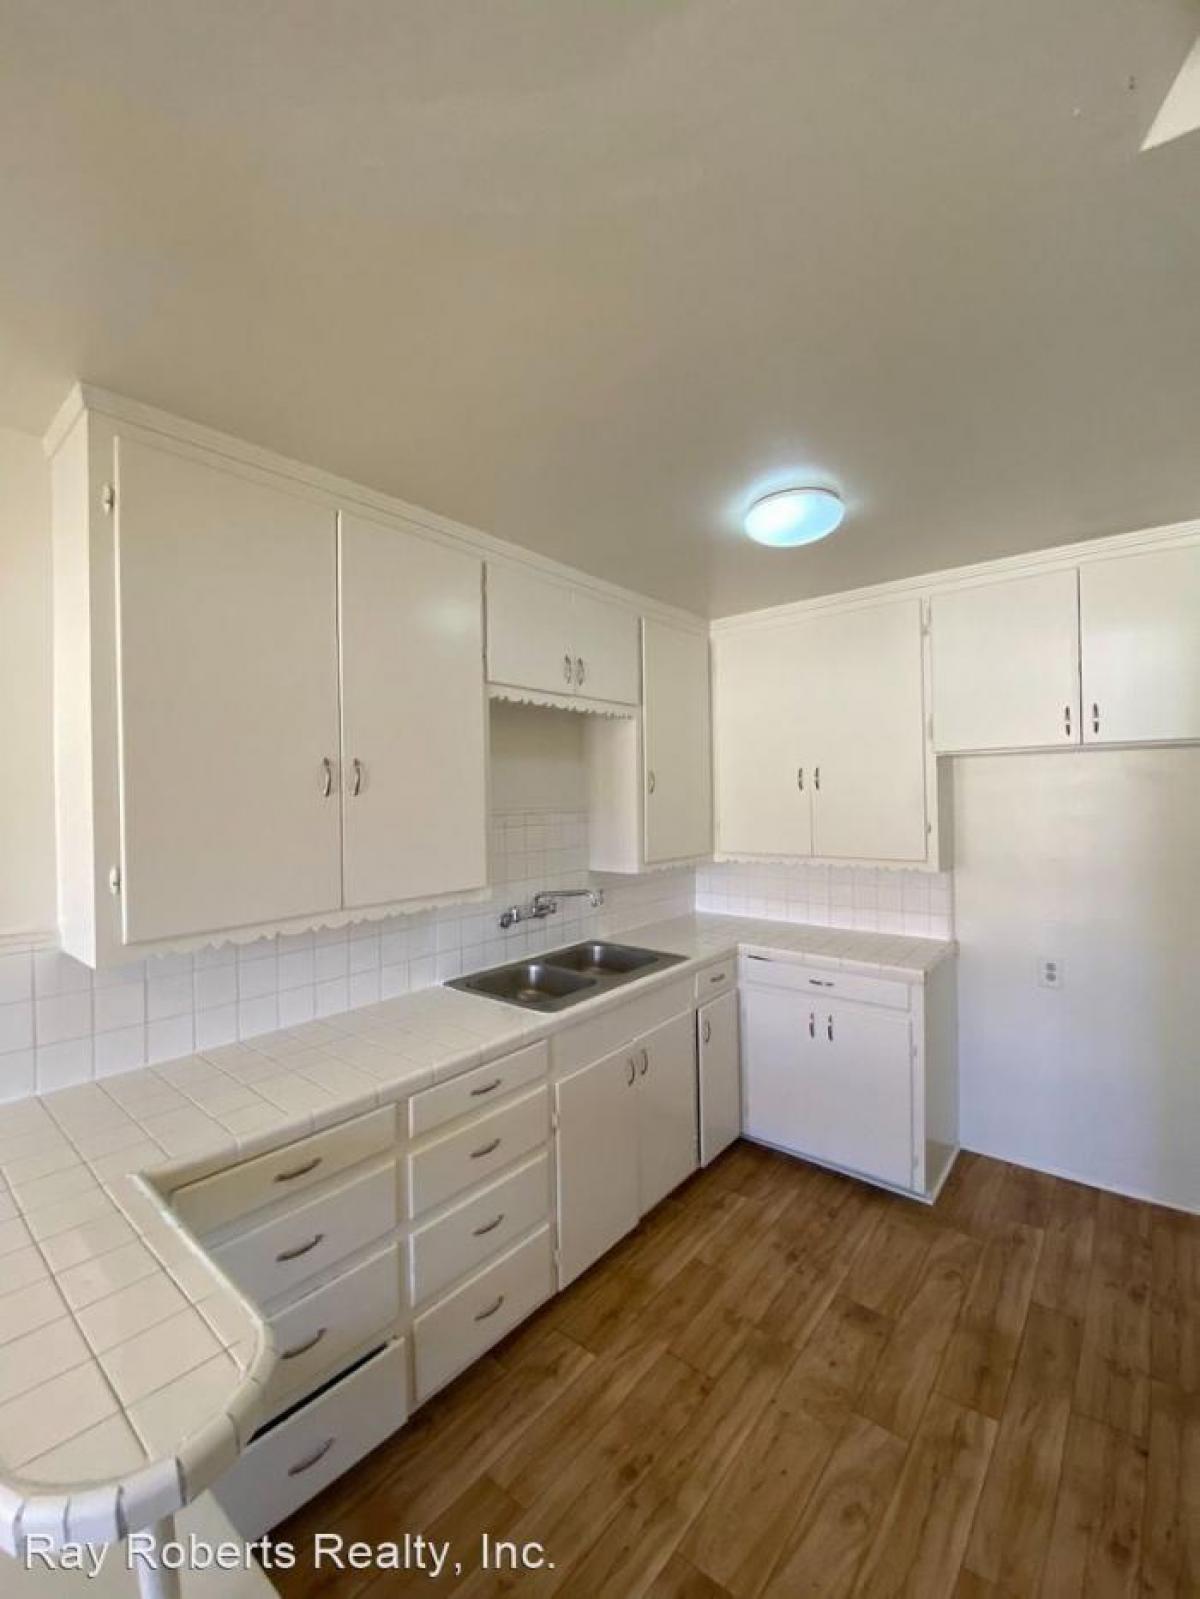 Picture of Apartment For Rent in Maywood, California, United States